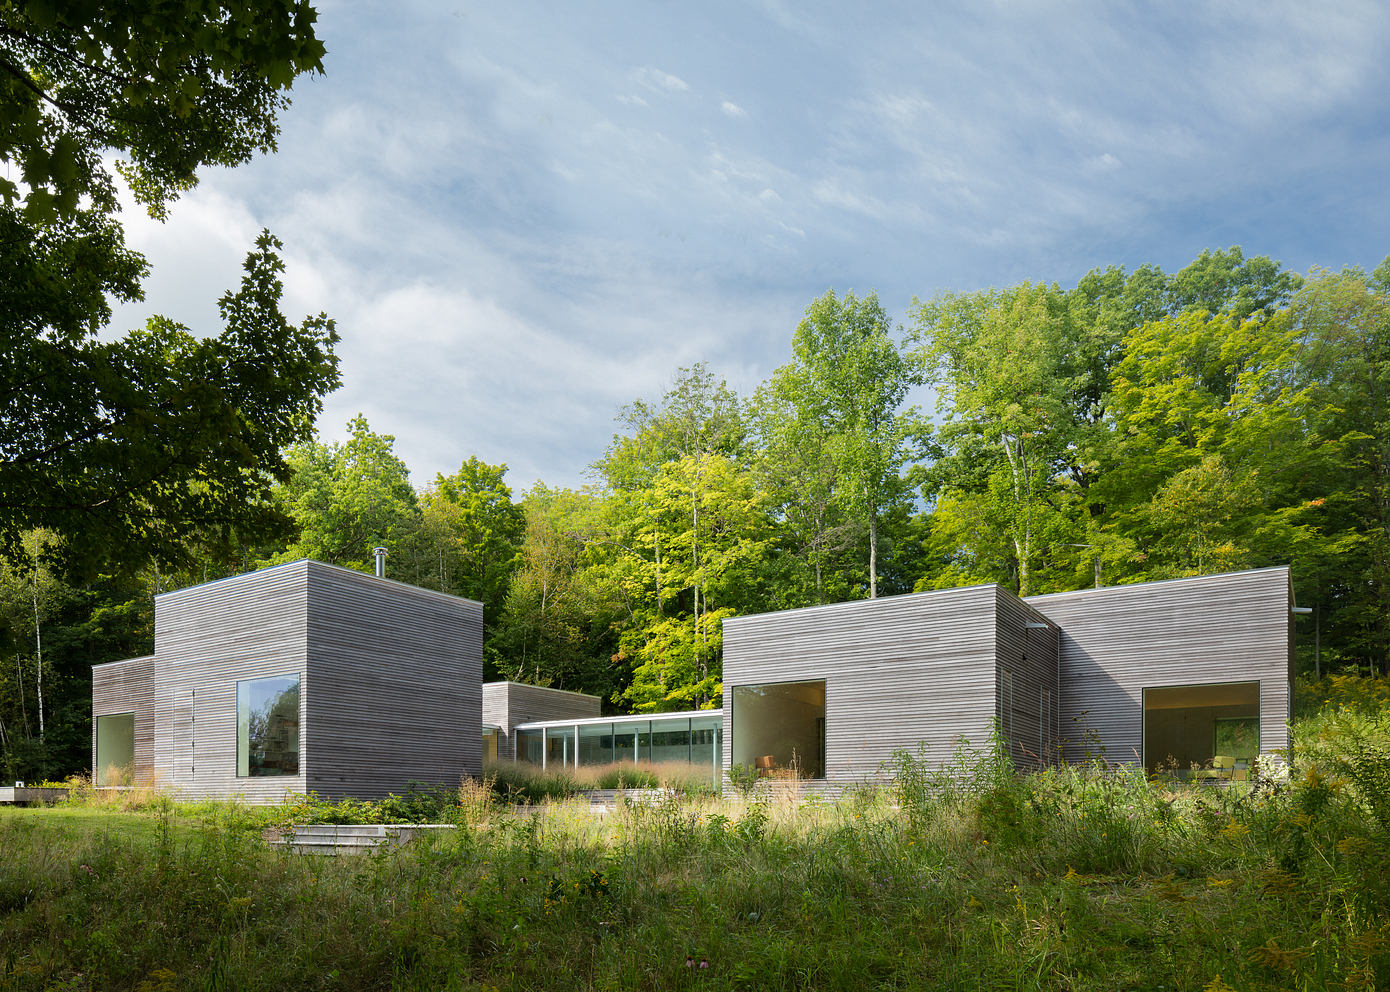 Artist’s Retreat: Exploring GLUCK+’s Wood-Clad Cubes in NY